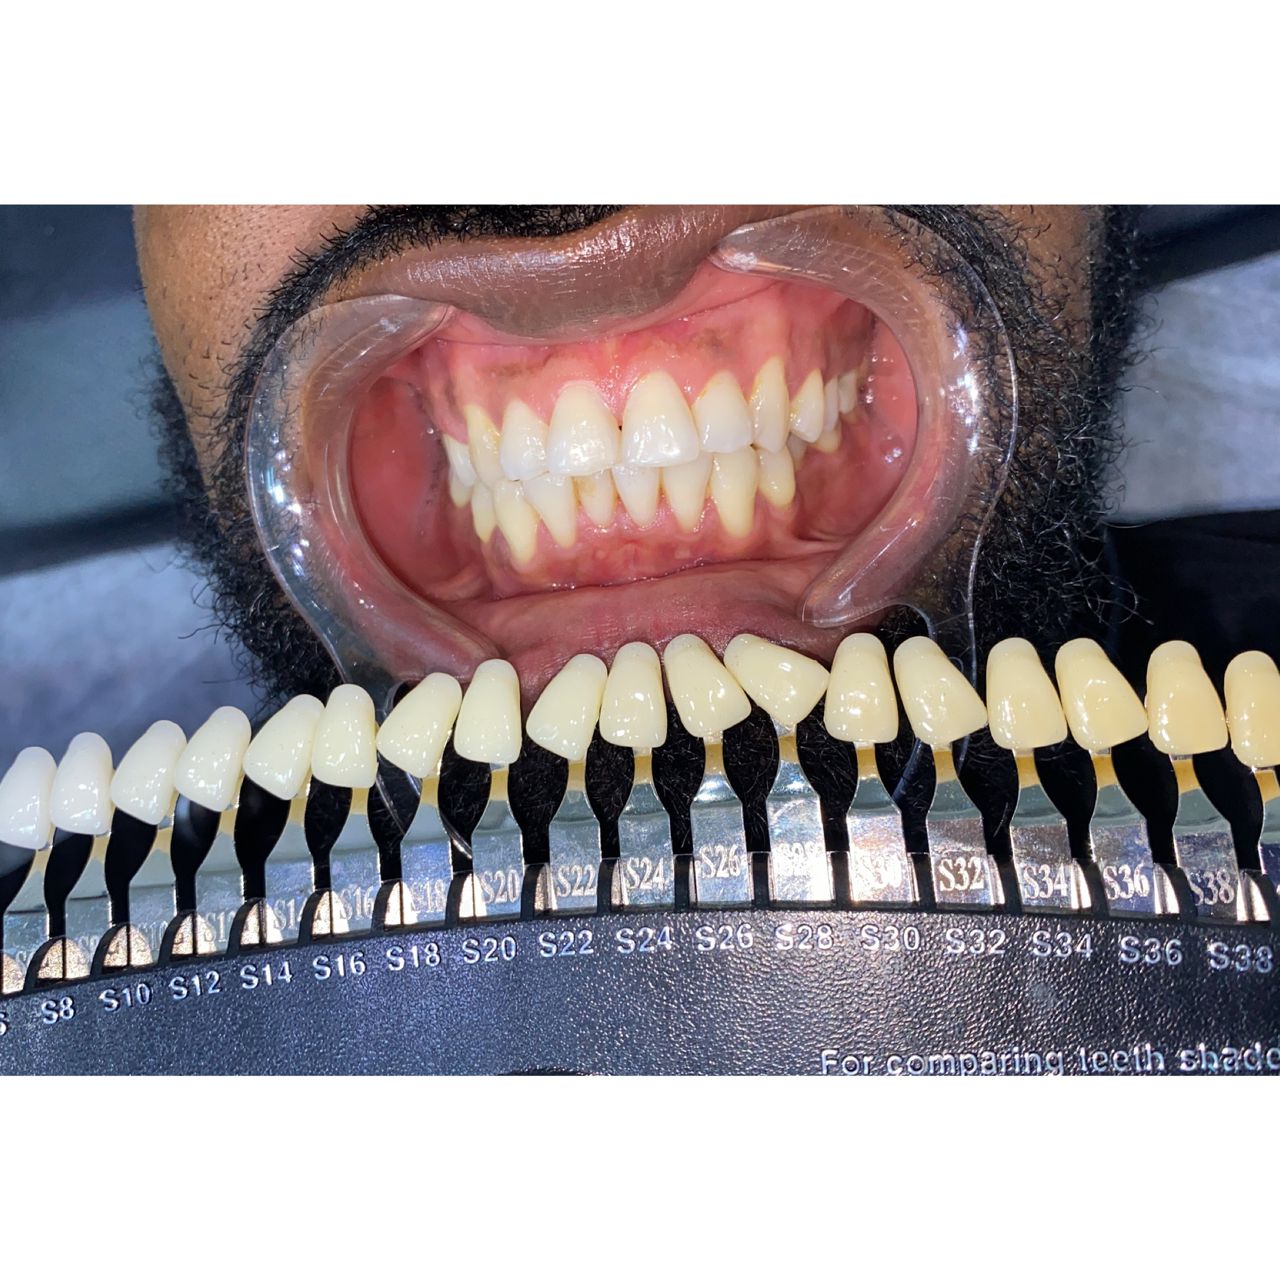 Imani Aesthetic and Laser Clinic, dentistry and Diamond Okechi teeth whitening in Lagos Nigeria